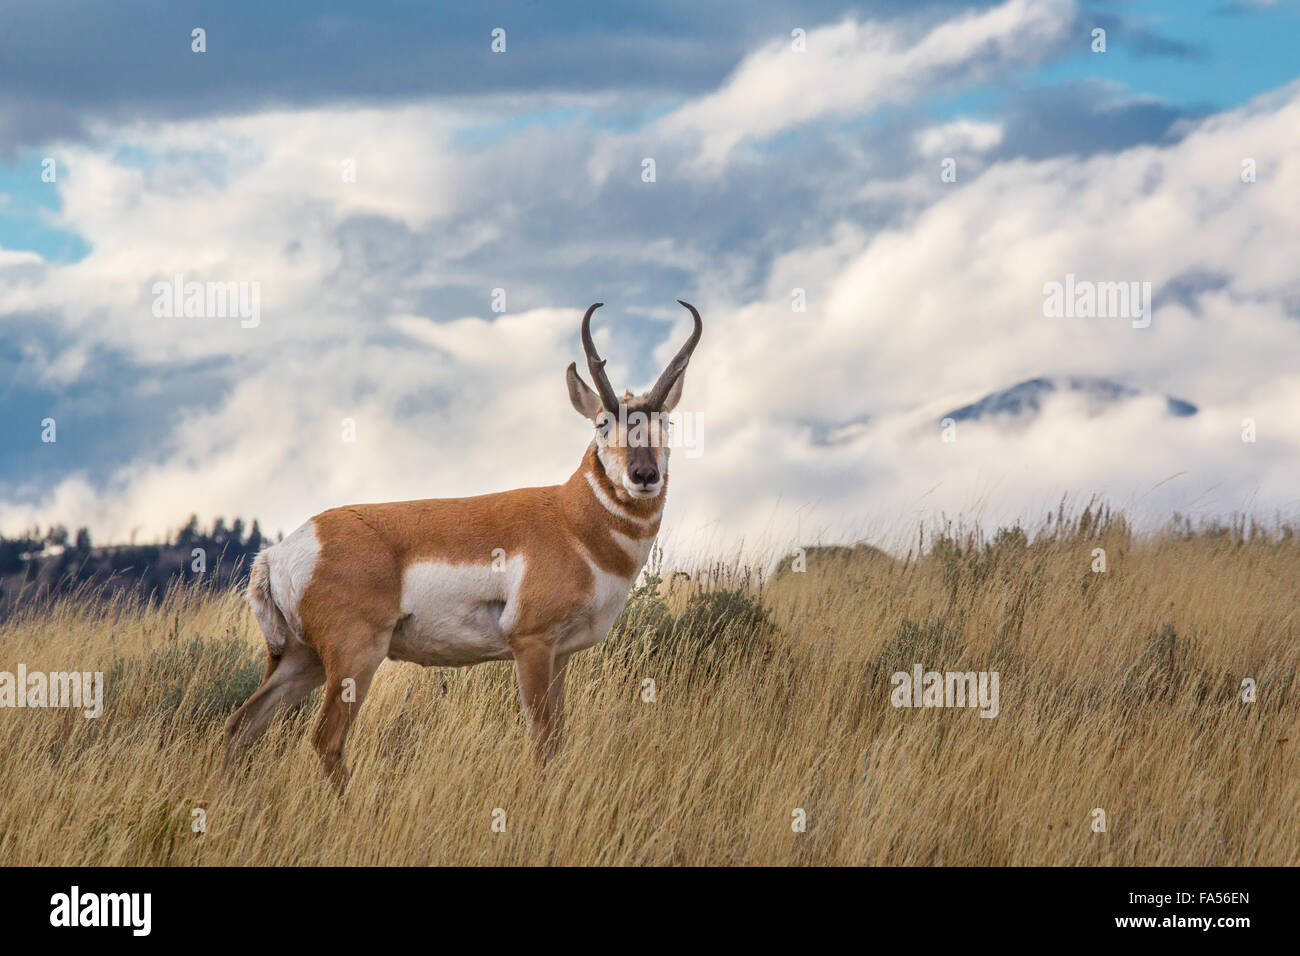 A male Pronghorn grazes in the Blacktail Deer Plateau at the Yellowstone National Park September 16, 2015 in Yellowstone, Wyoming. The deer-like Pronghorn is the sole surviving member of an ancient family dating back 20 million years and the only animal in the world with branched horns and to shed its horns, as if they were antlers. The Pronghorn is the fastest animal in the western hemisphere, running in 20-foot bounds at up to 60 miles per hour. Stock Photo